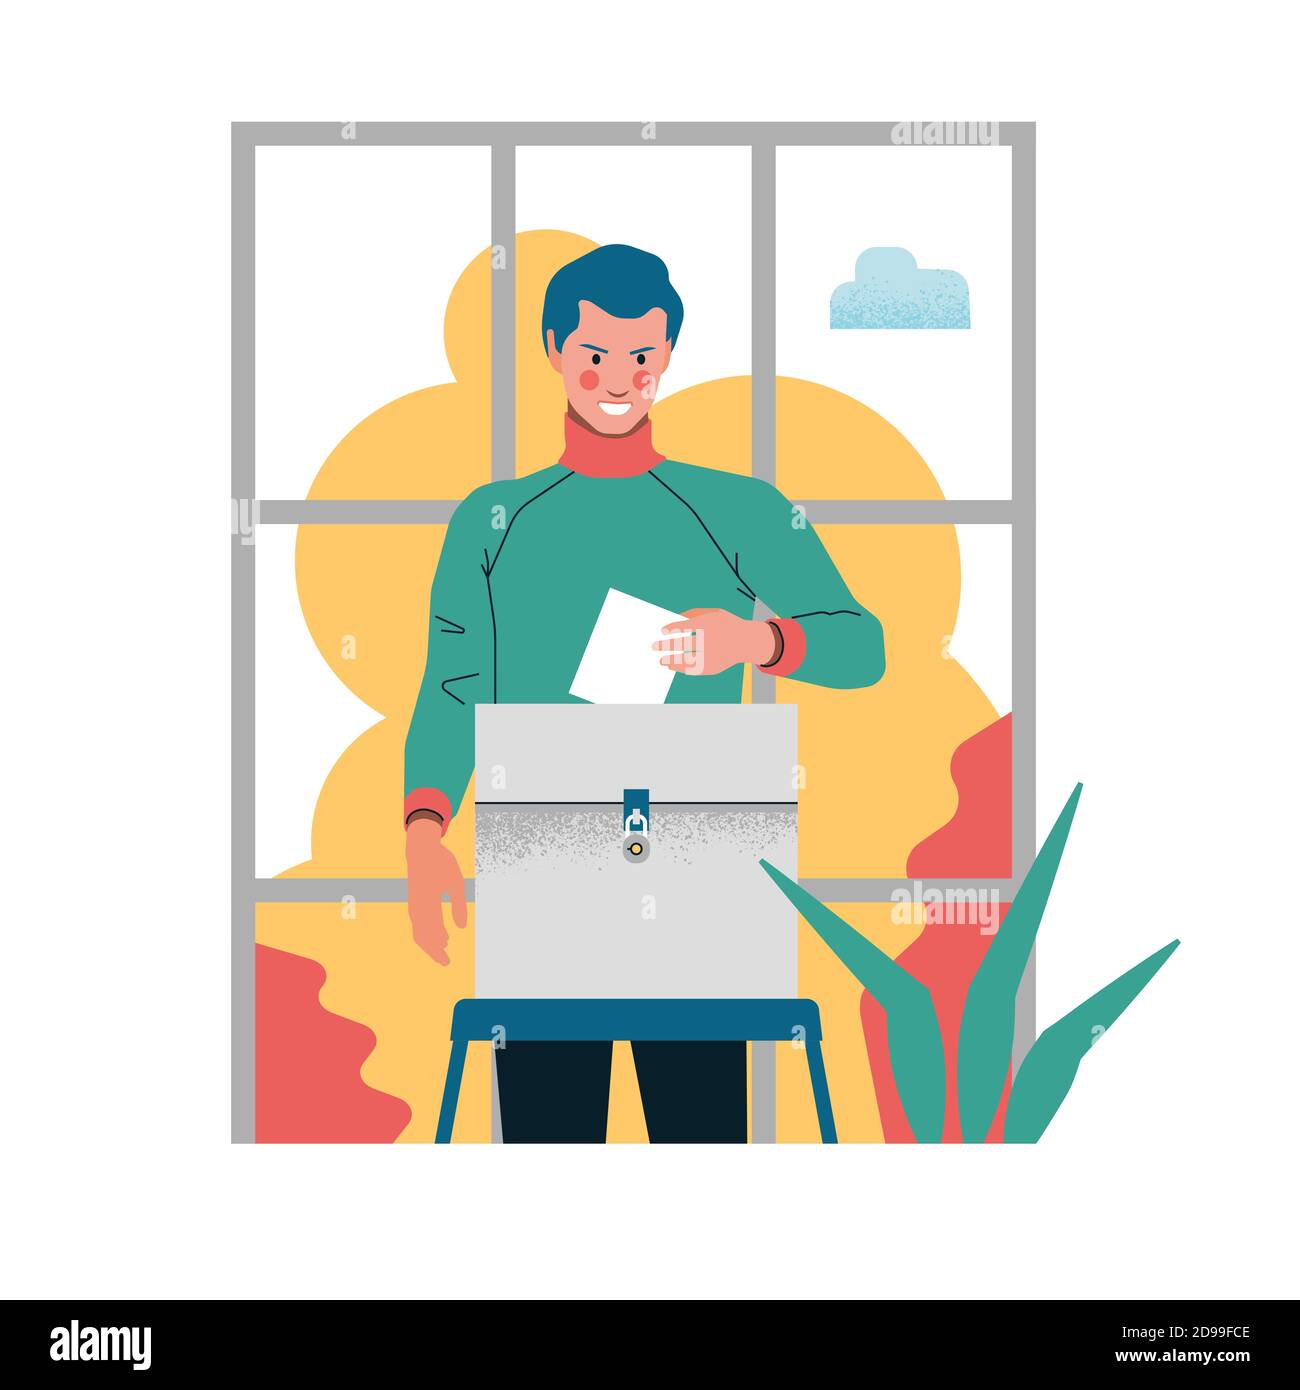 Elector - a man voting in the elections, putting a ballot in the ballot box, minimalistic flat illustration, window, trees, cloud, isolated on white, Stock Vector